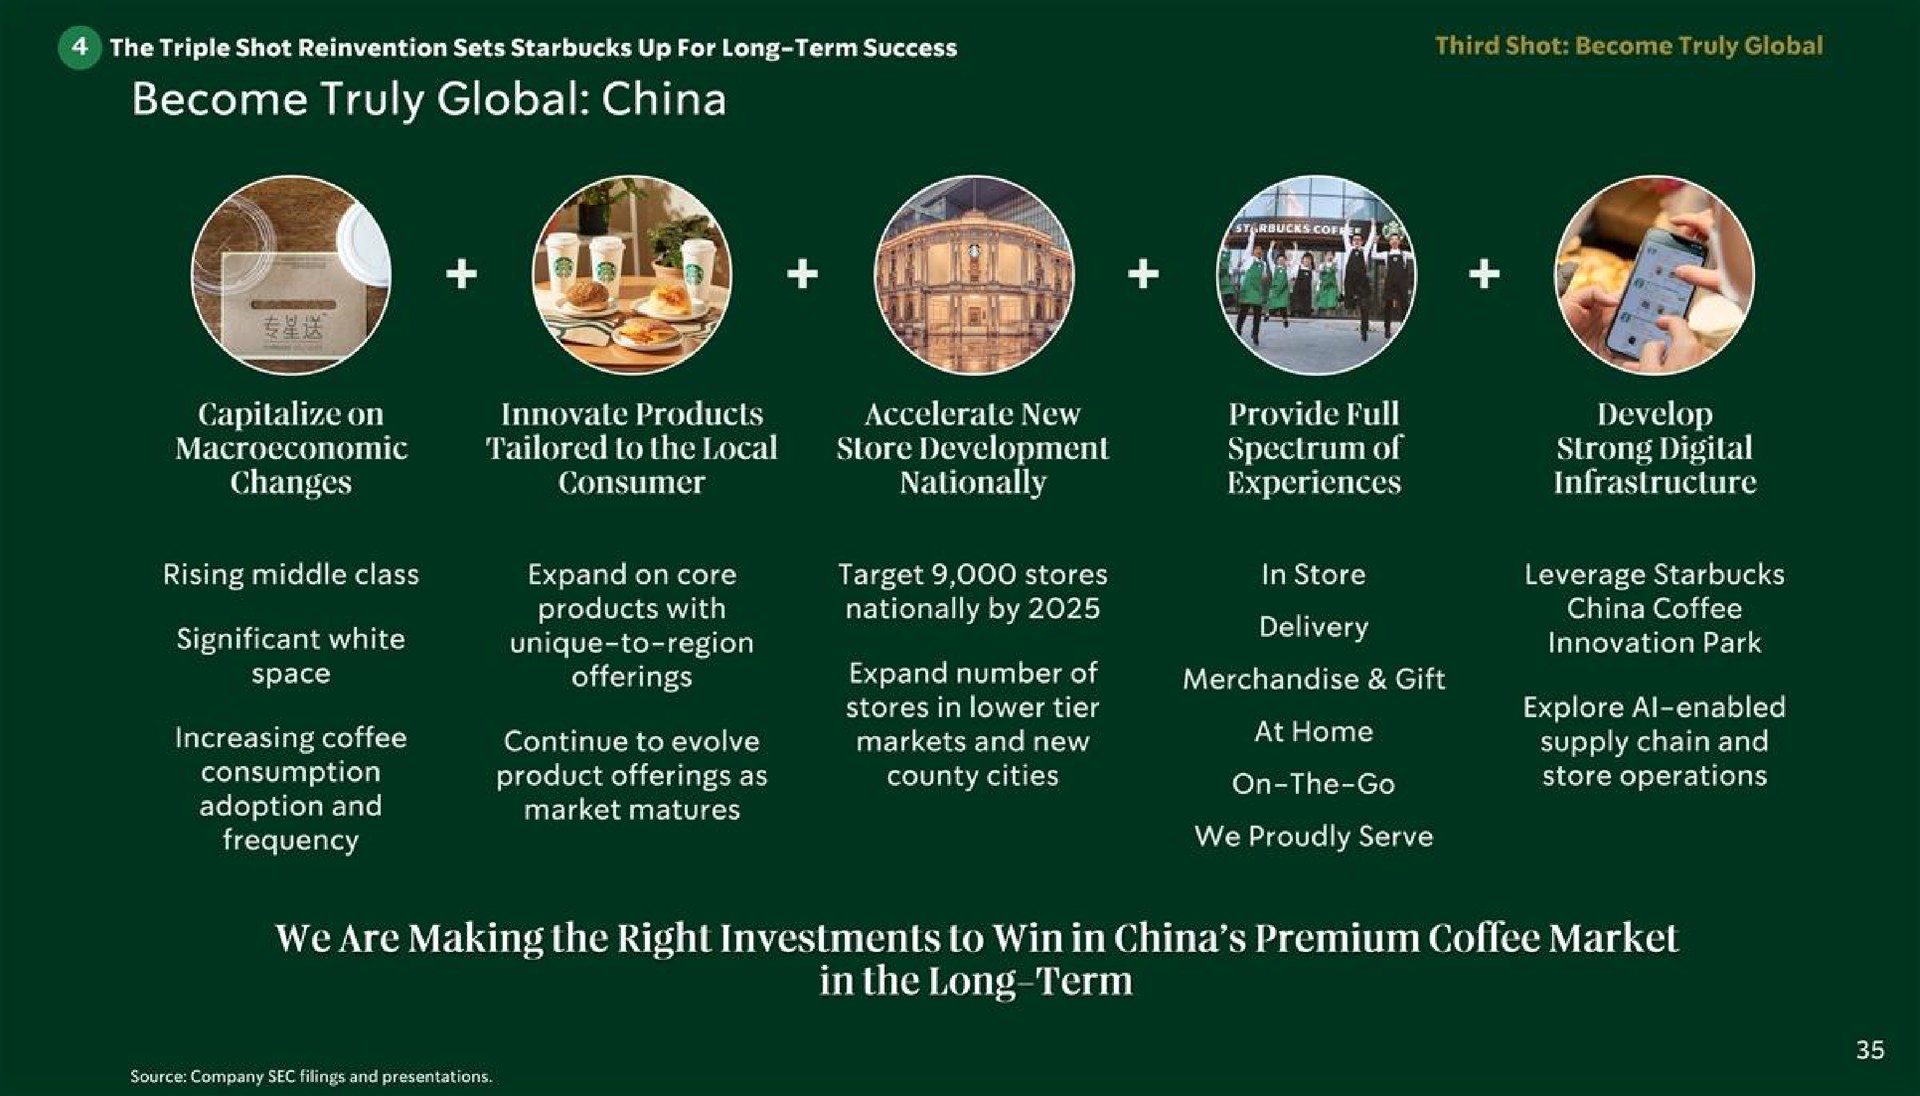 become truly global china a eye alo ere leds merchandise gift we are making the right investments to win in china premium coffee market in the long term | Starbucks